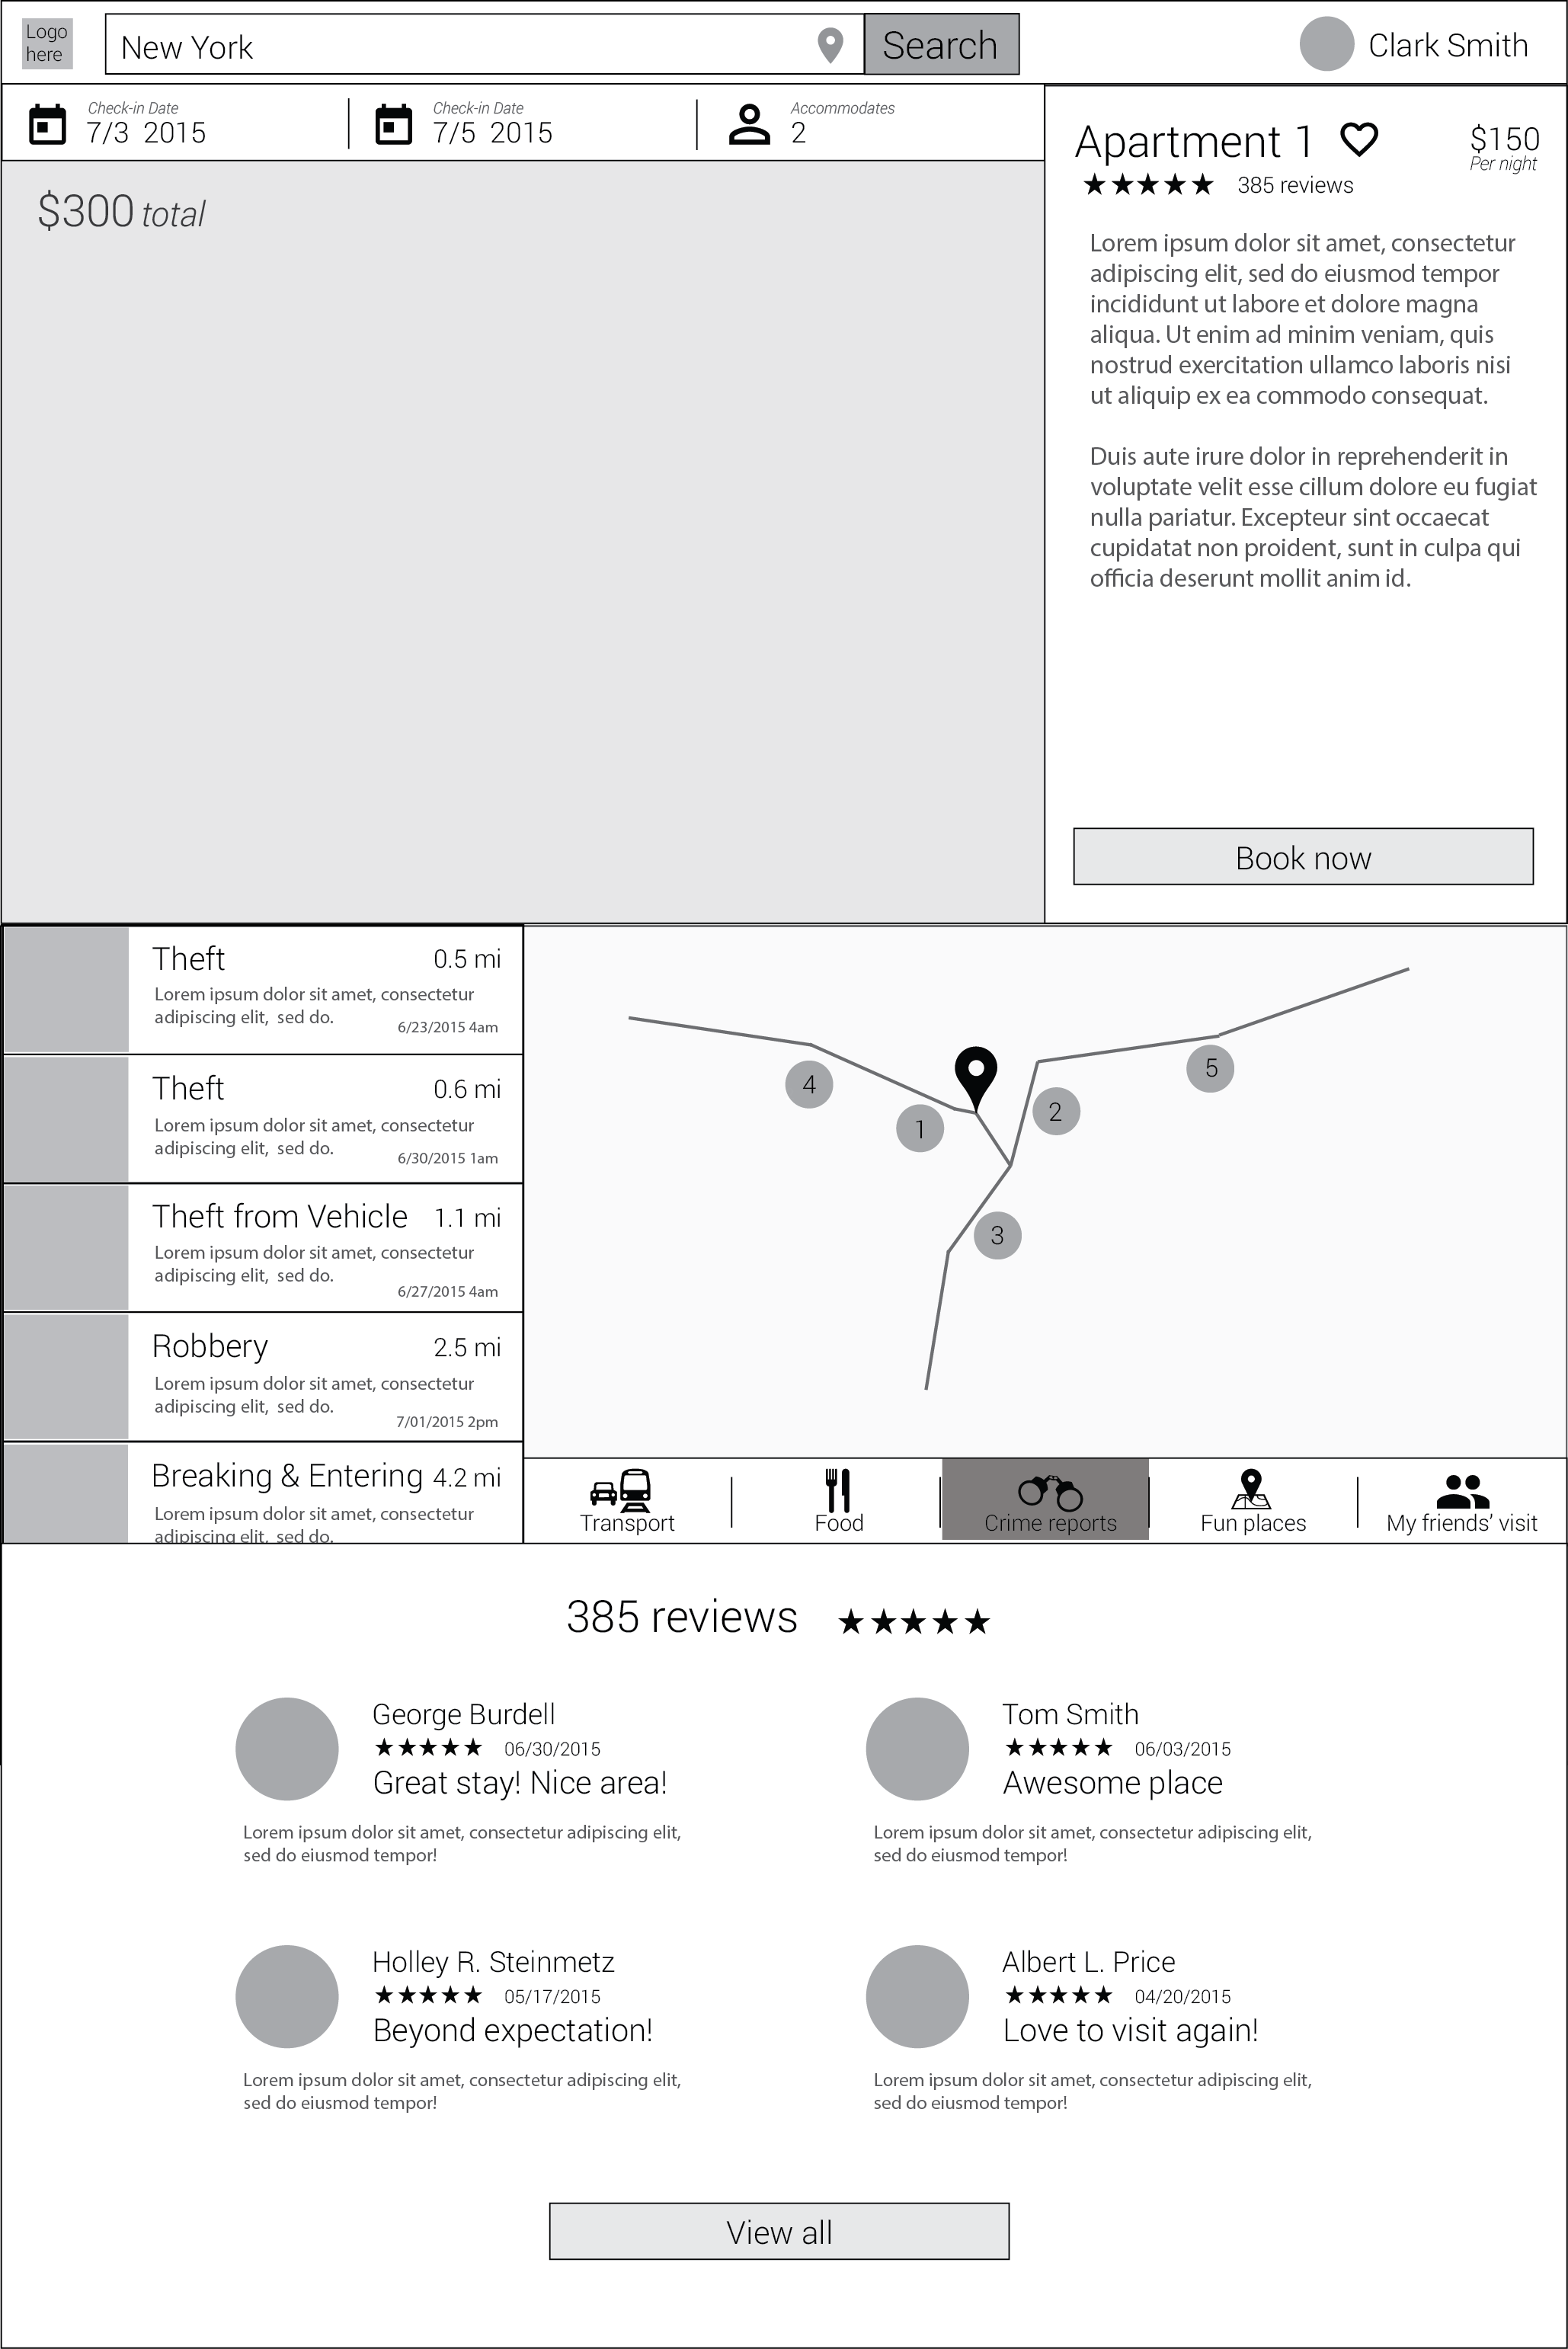 Wireframe, Candidate screen - Leverage similar experience of mobile design
													but display more information at once